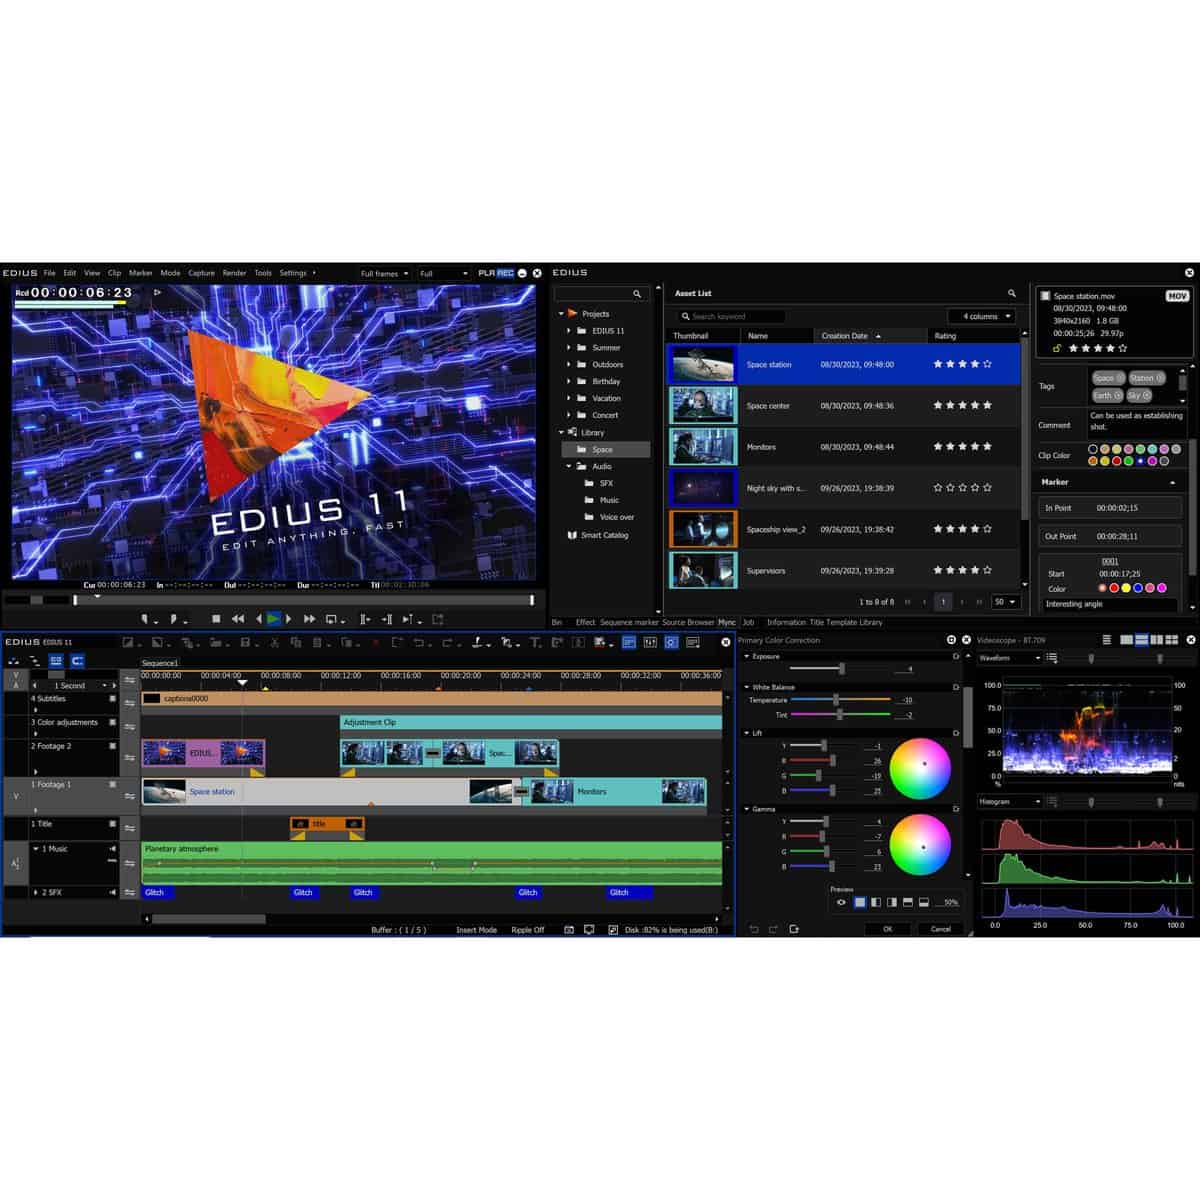 EDIUS 11 Workgroup Video Editing Software Upgrade from EDIUS X Workgroup, Download Only